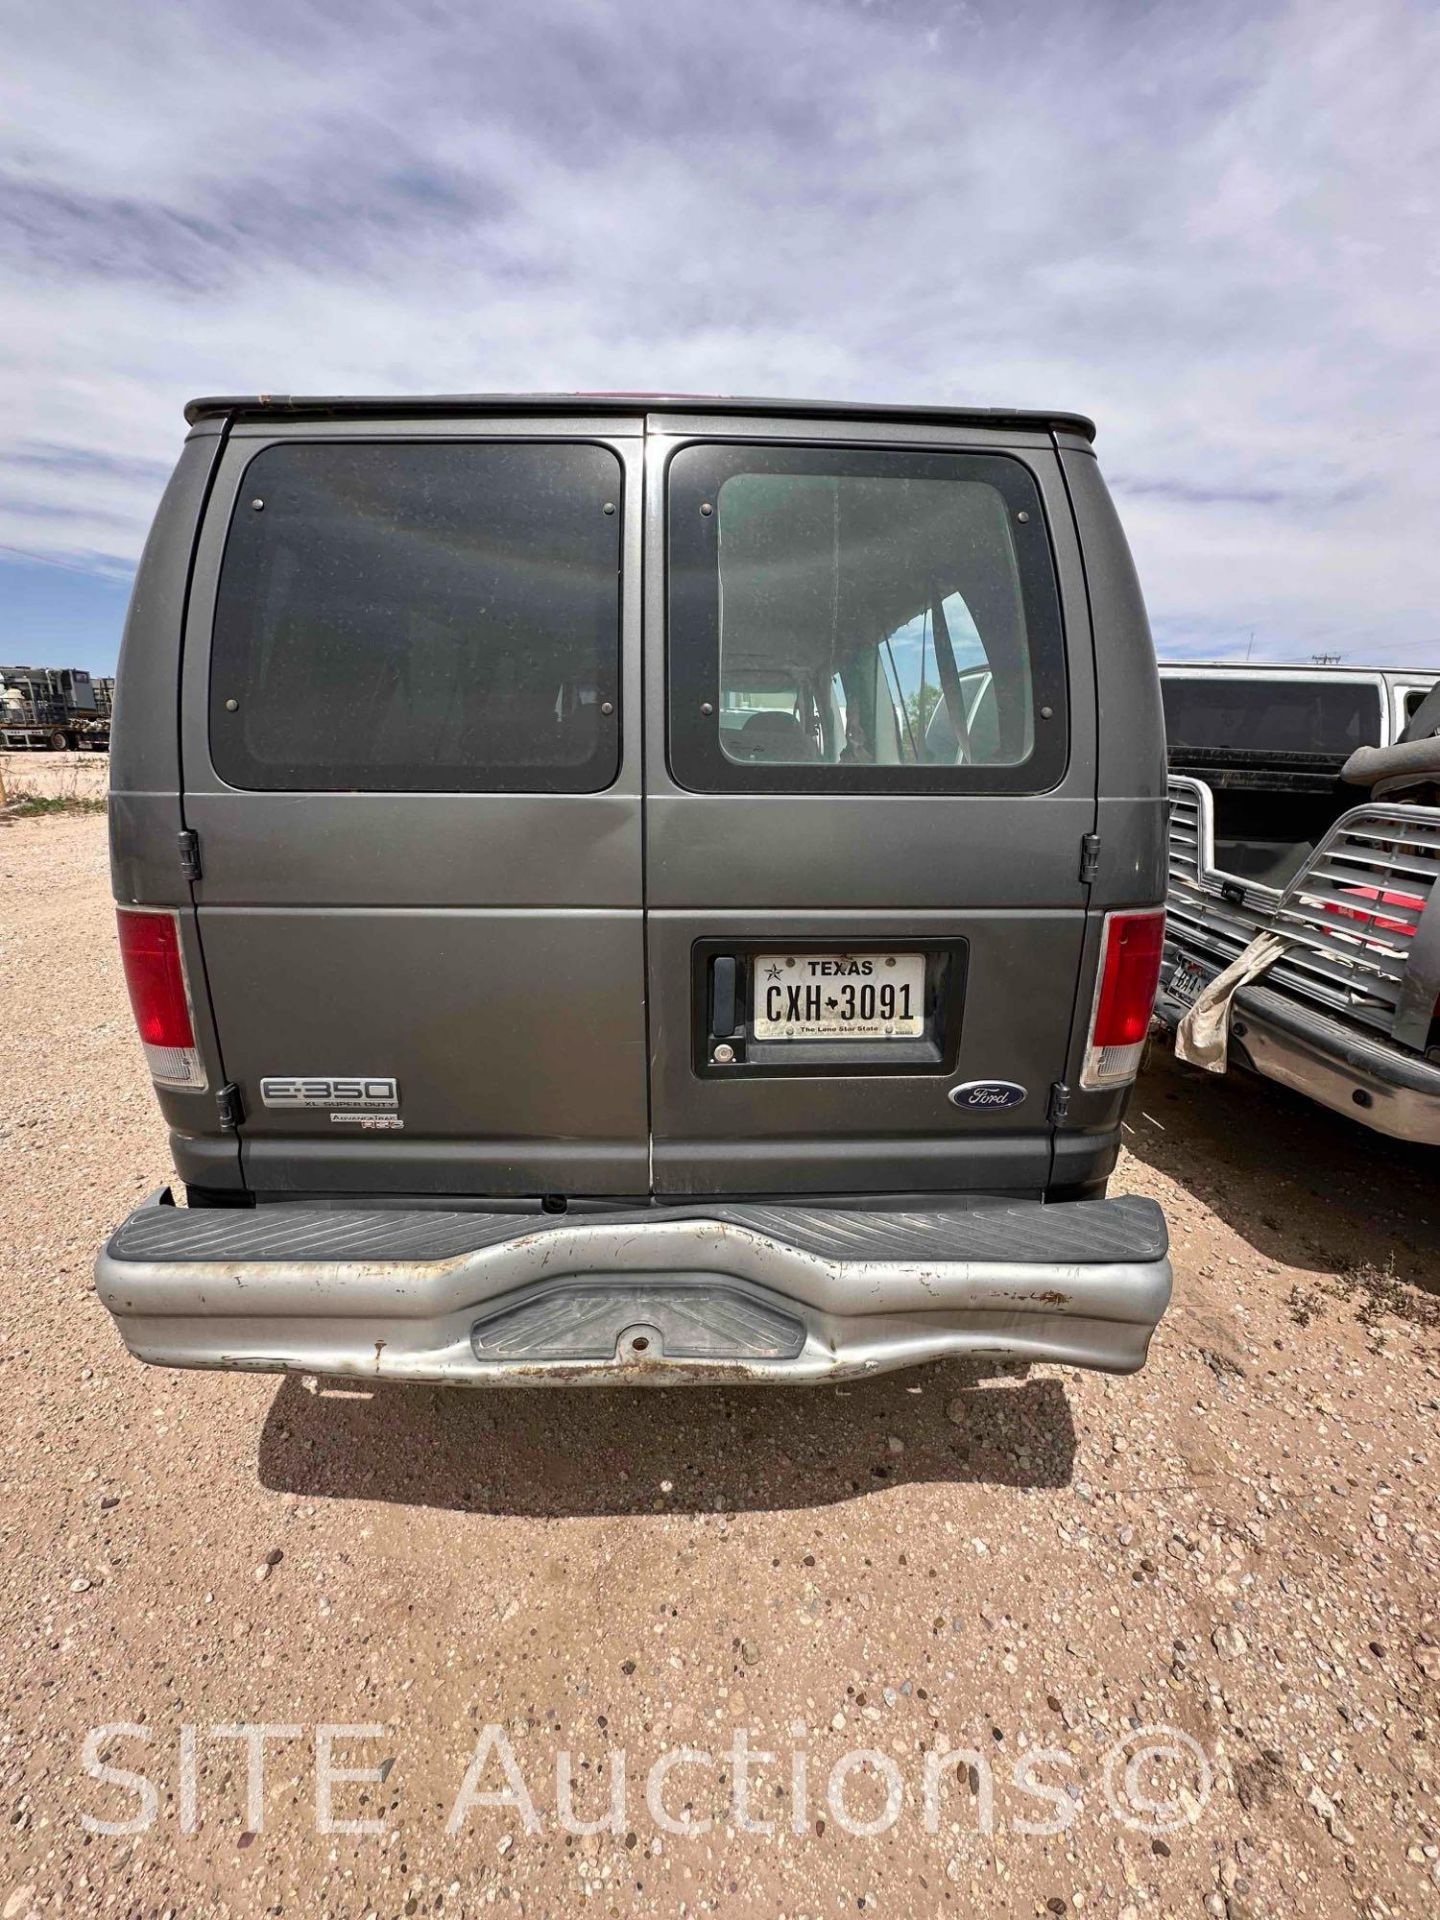 2007 Ford E350 Van - Image 5 of 15